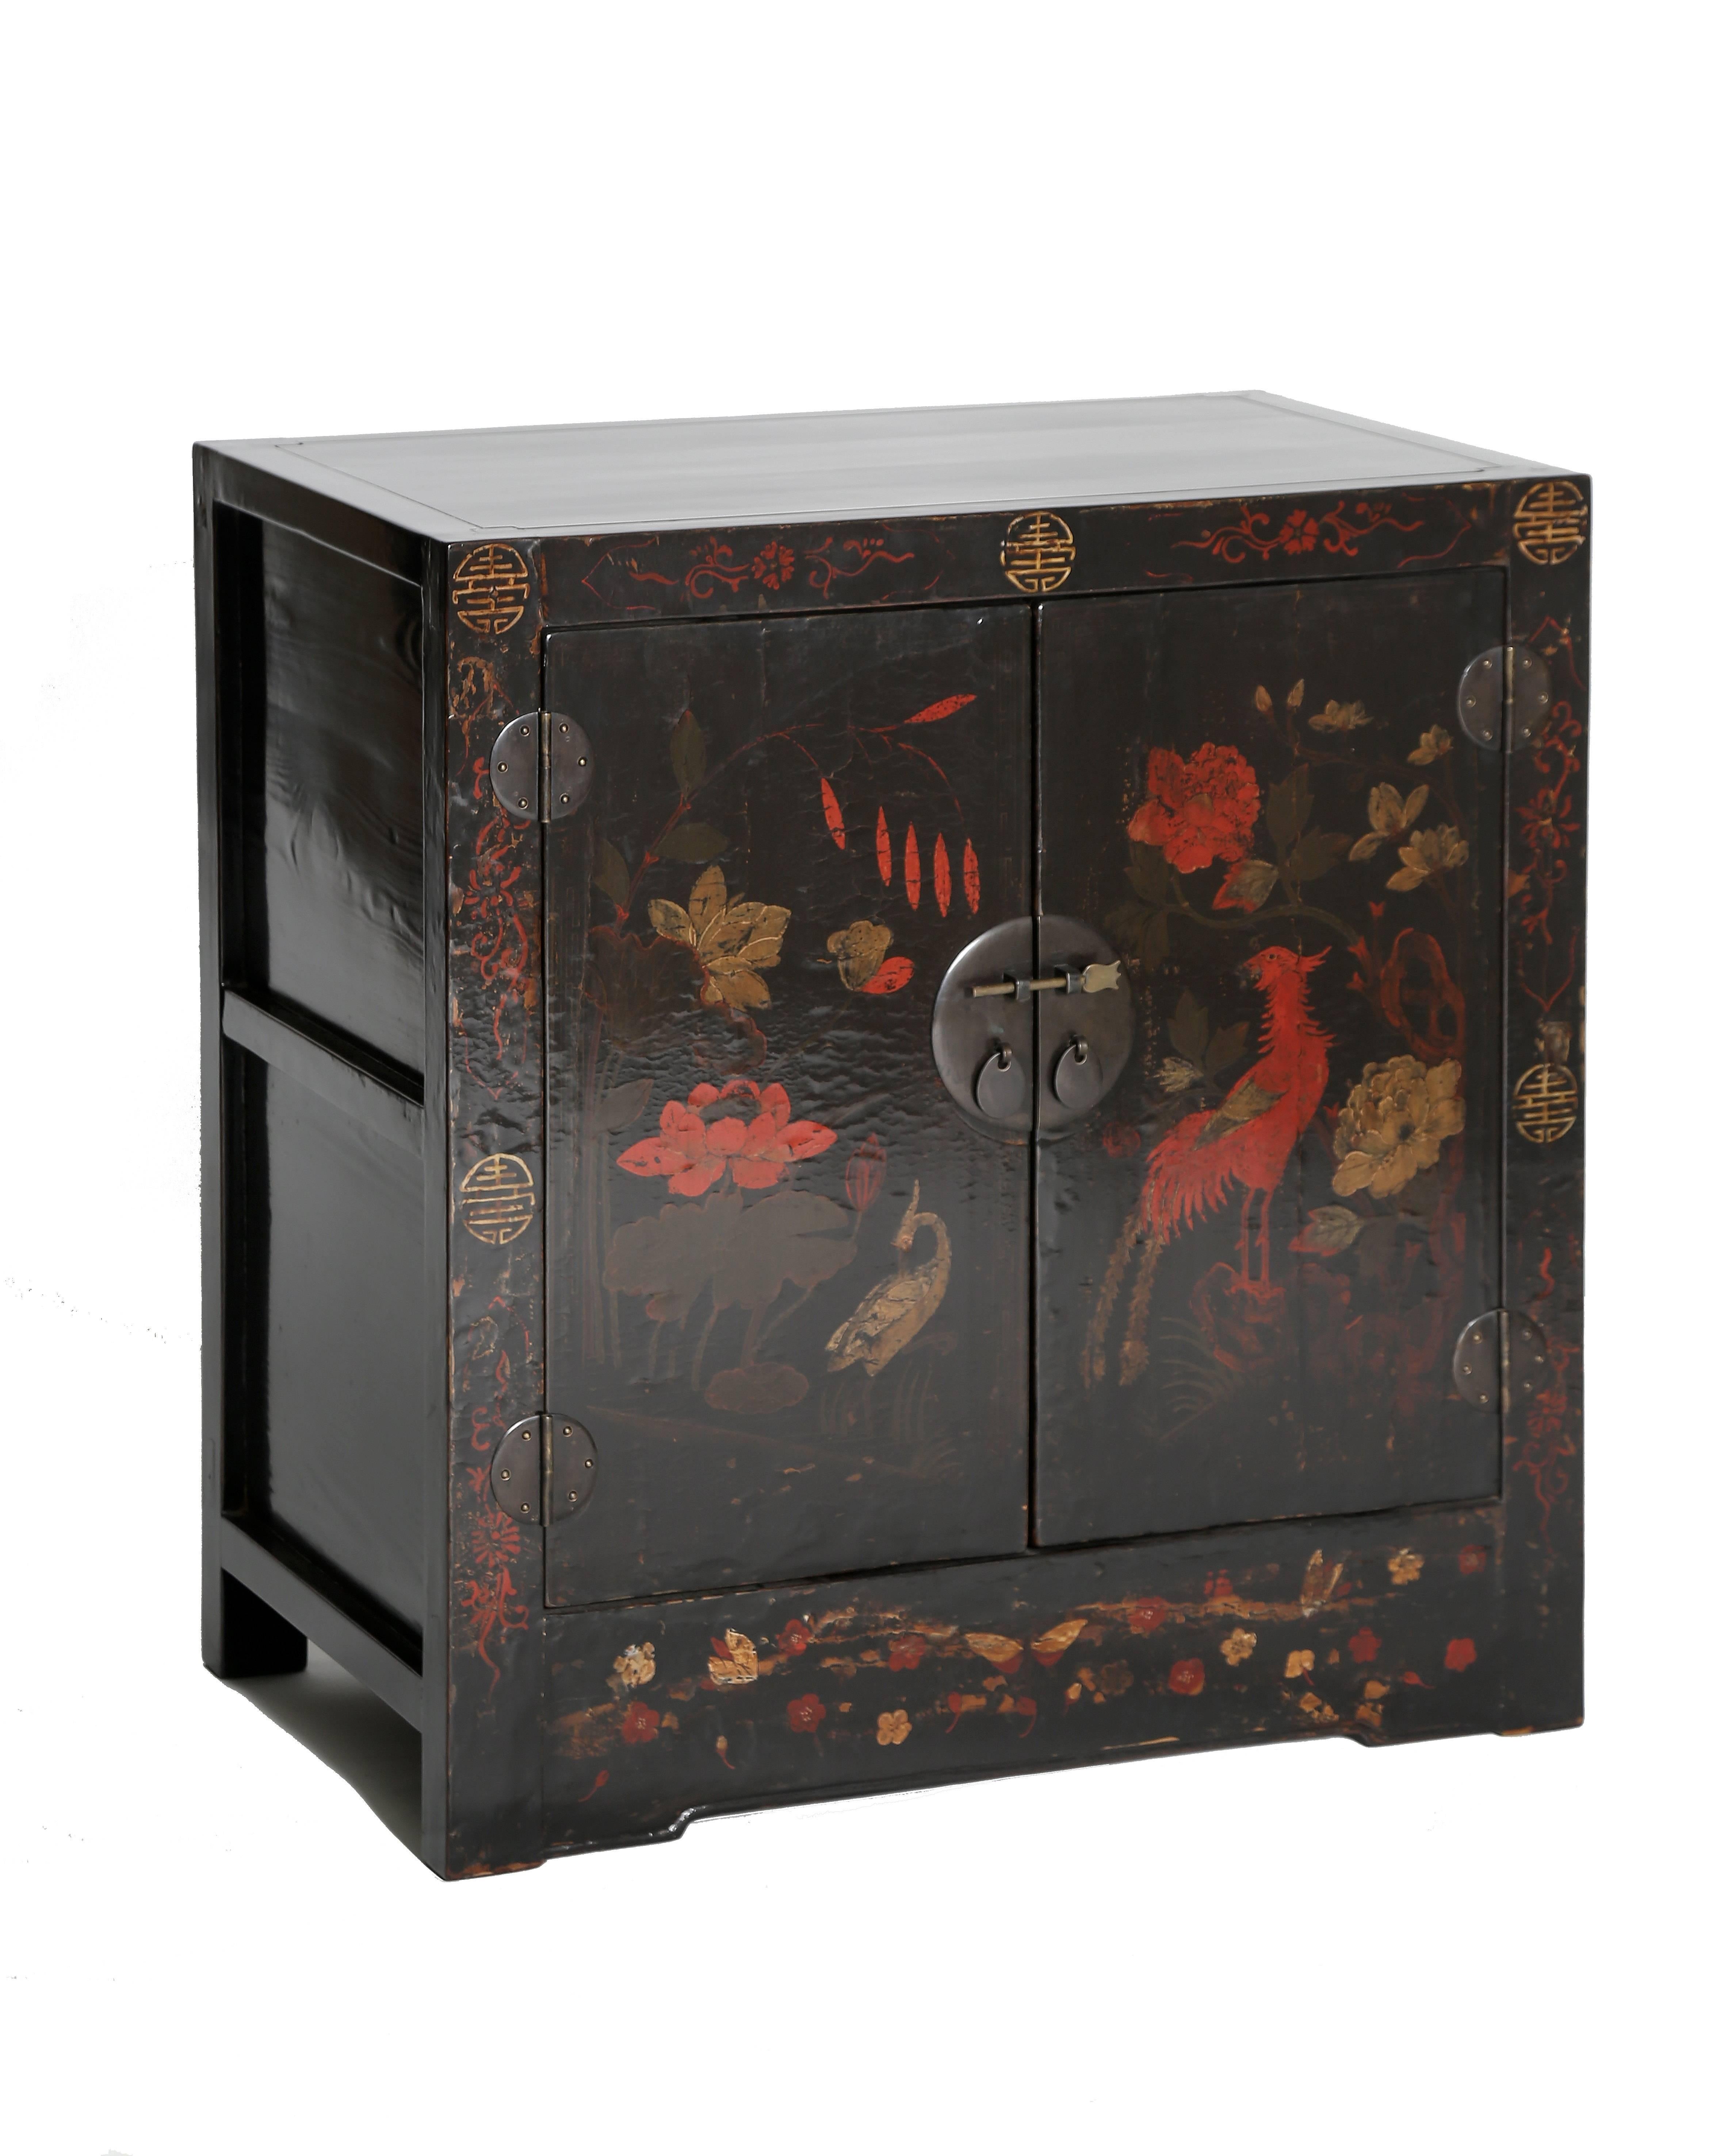 Chinese Antique Chinoiserie Pr Painted Lacquer Cabinets /Chests Seasons Floral Paintings